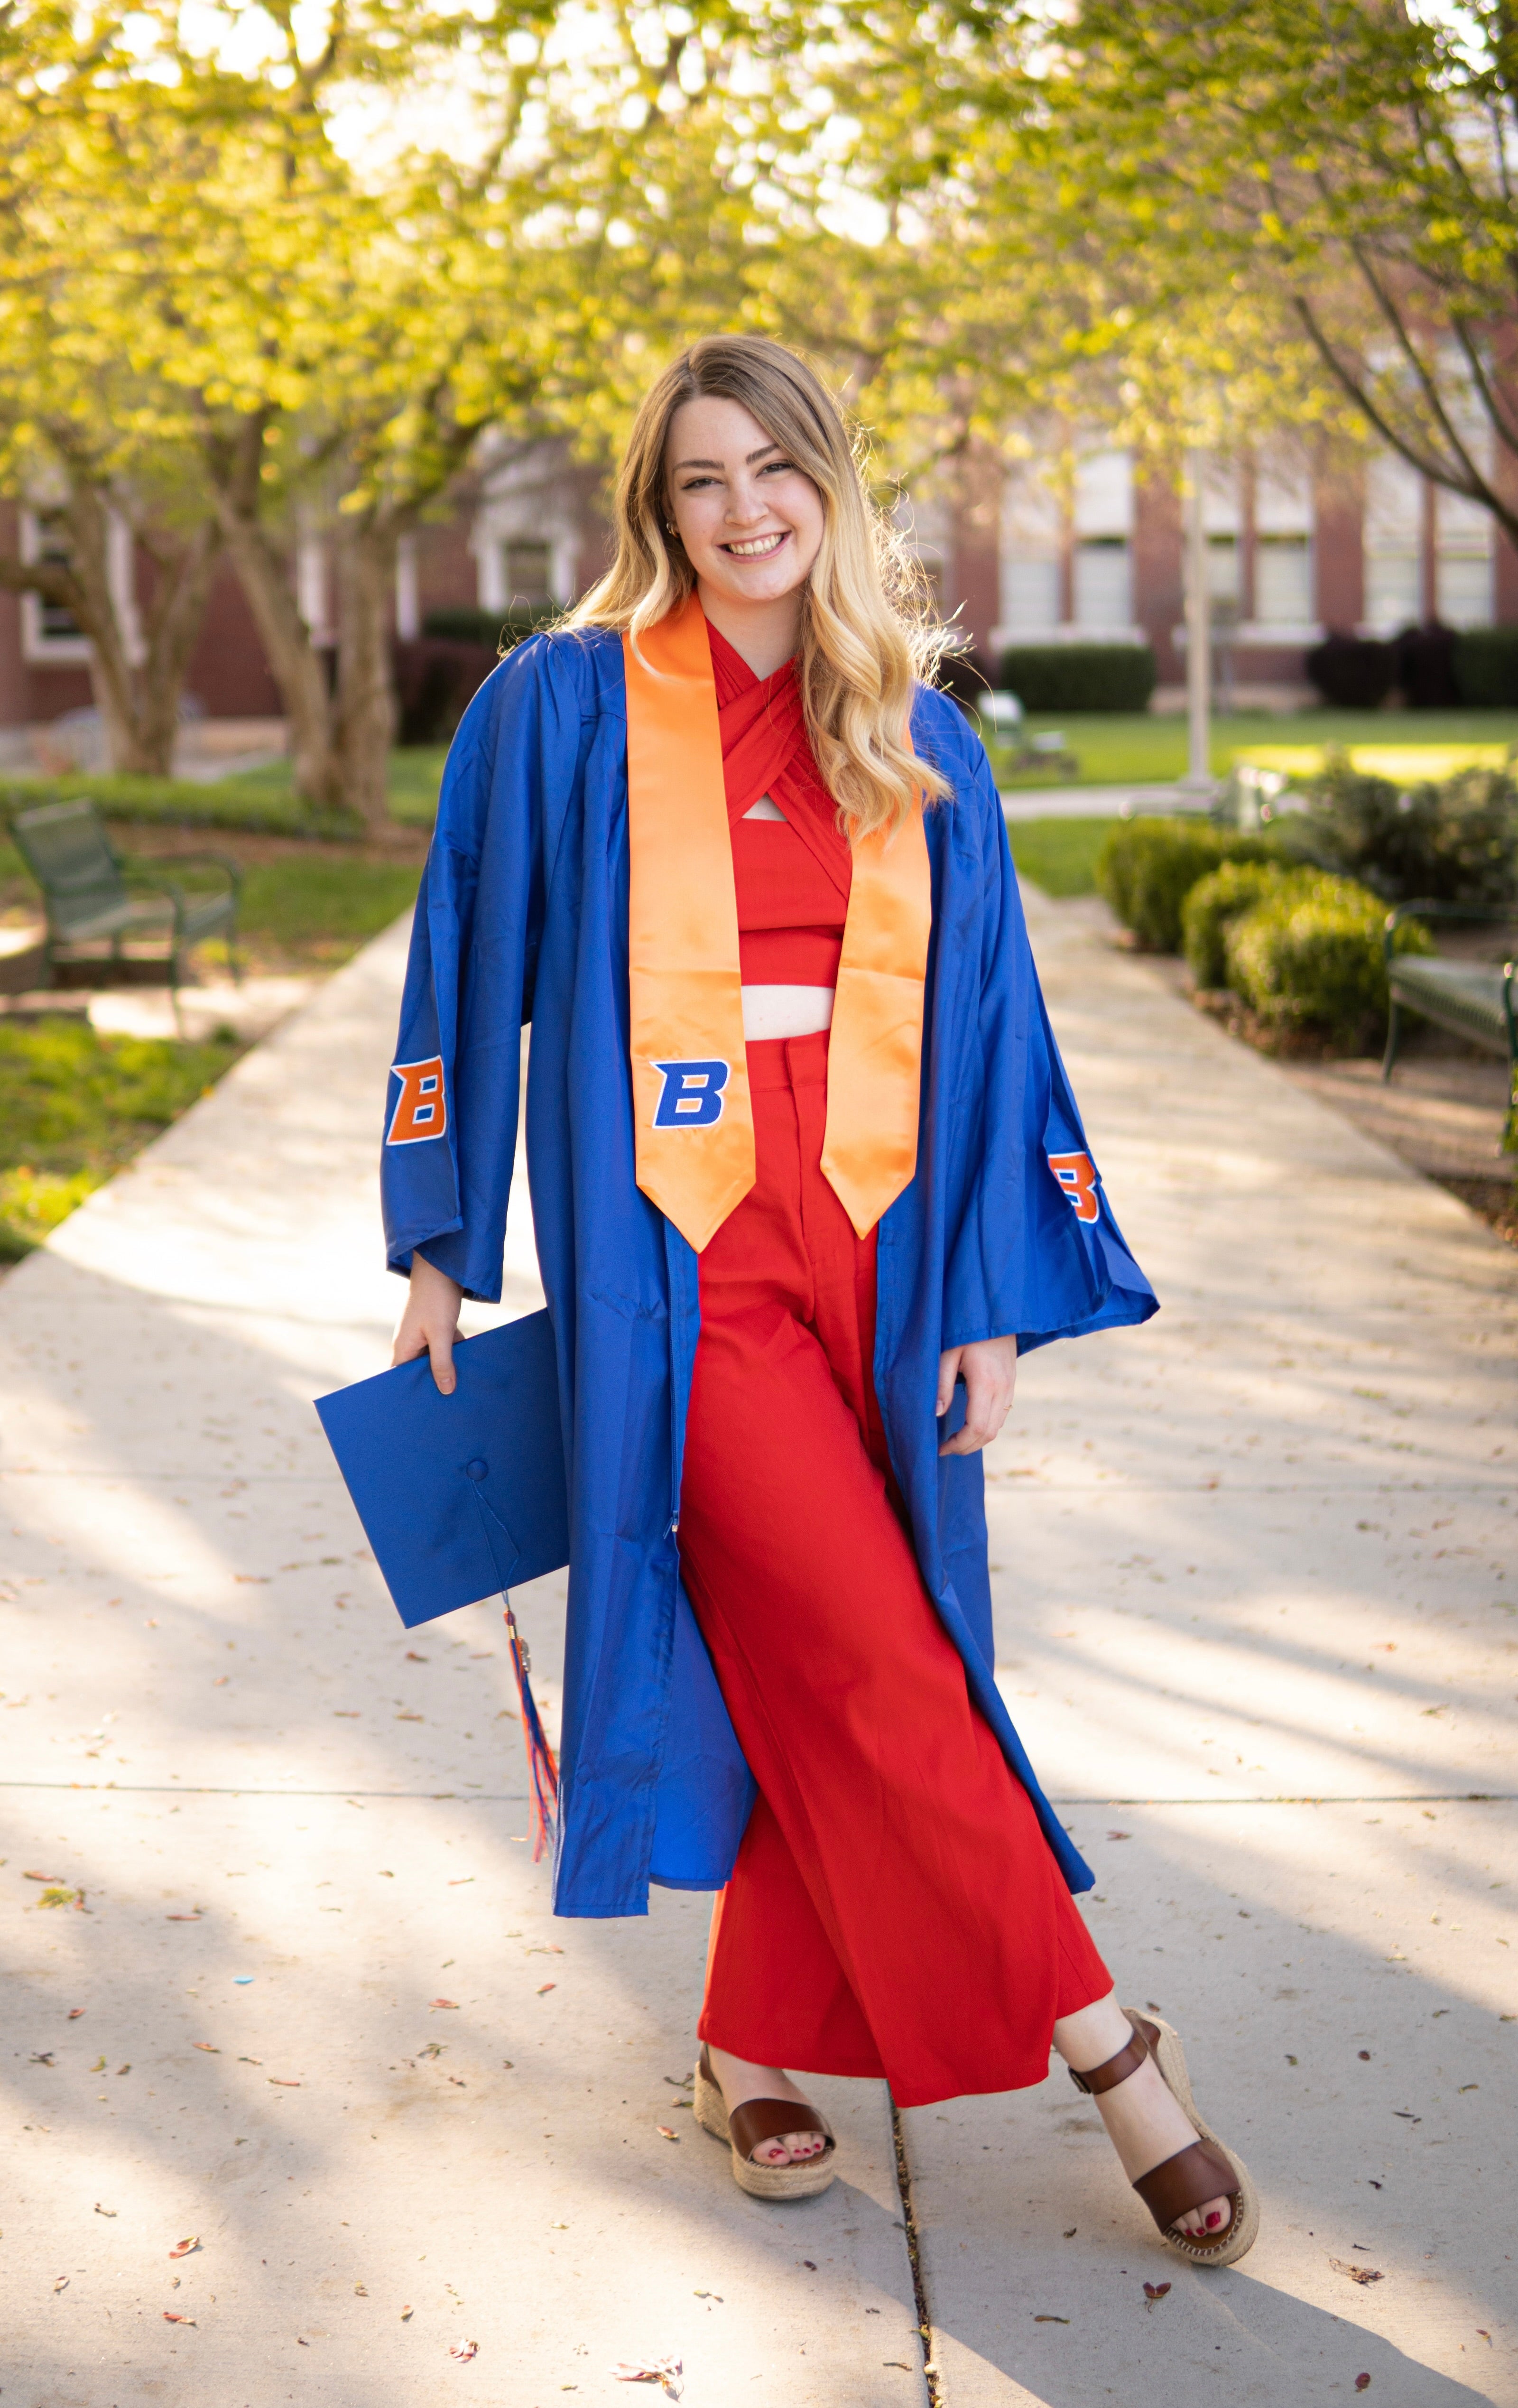 Grace Hall poses in her cap and gown